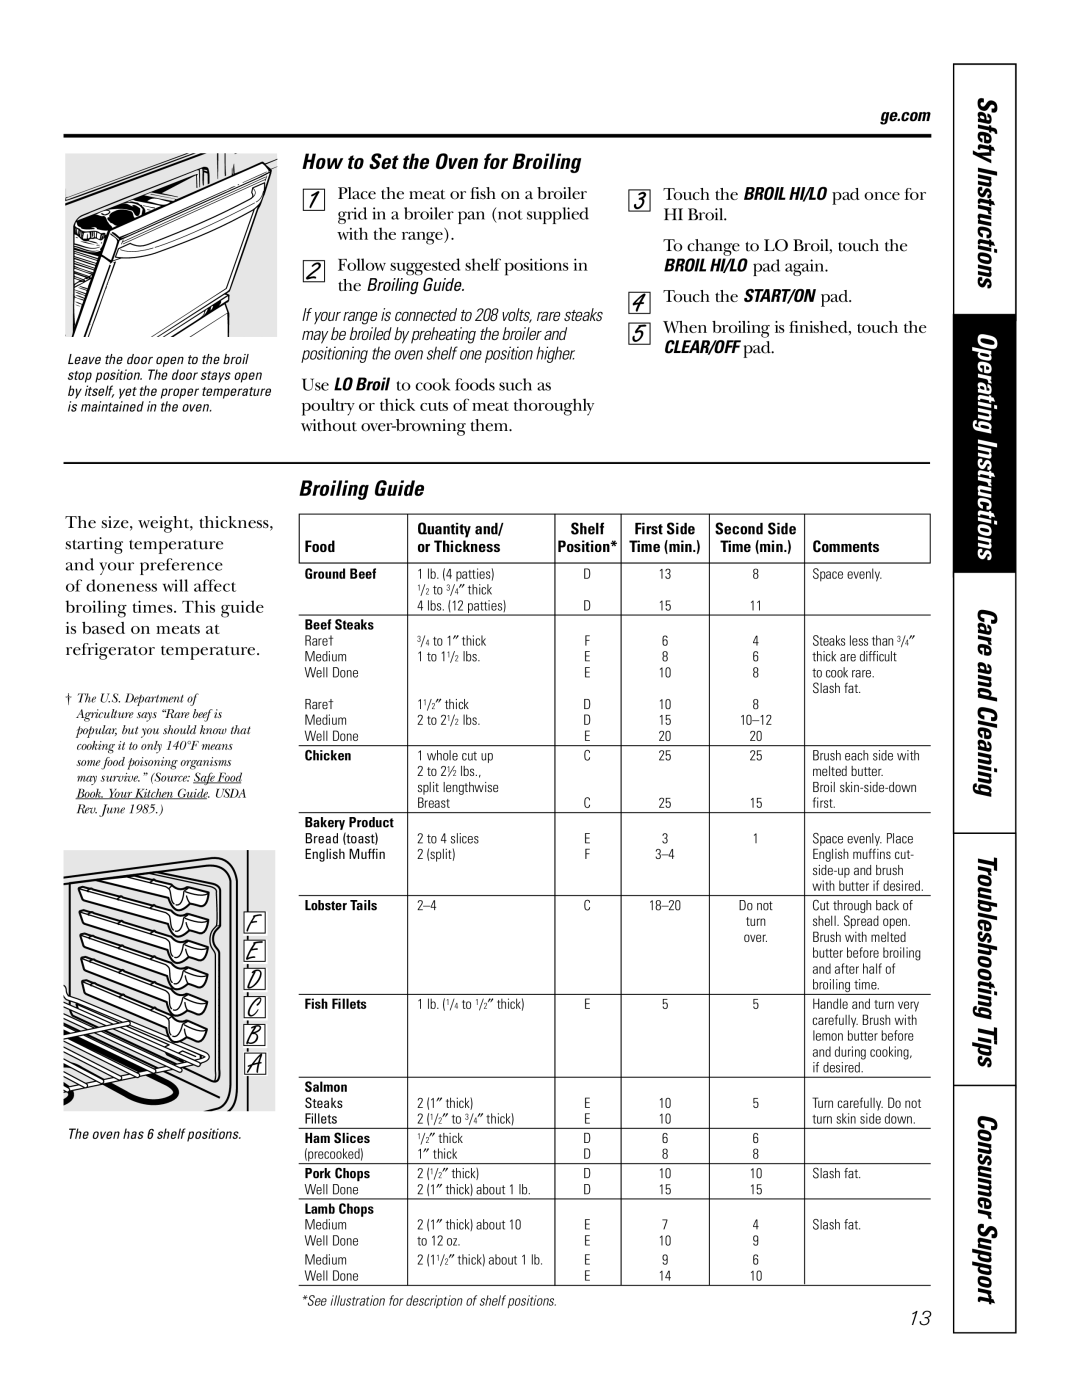 GE JBS55 Instructions Operating, Instructions Care and Cleaning Troubleshooting Tips Consumer Support, Broiling Guide 